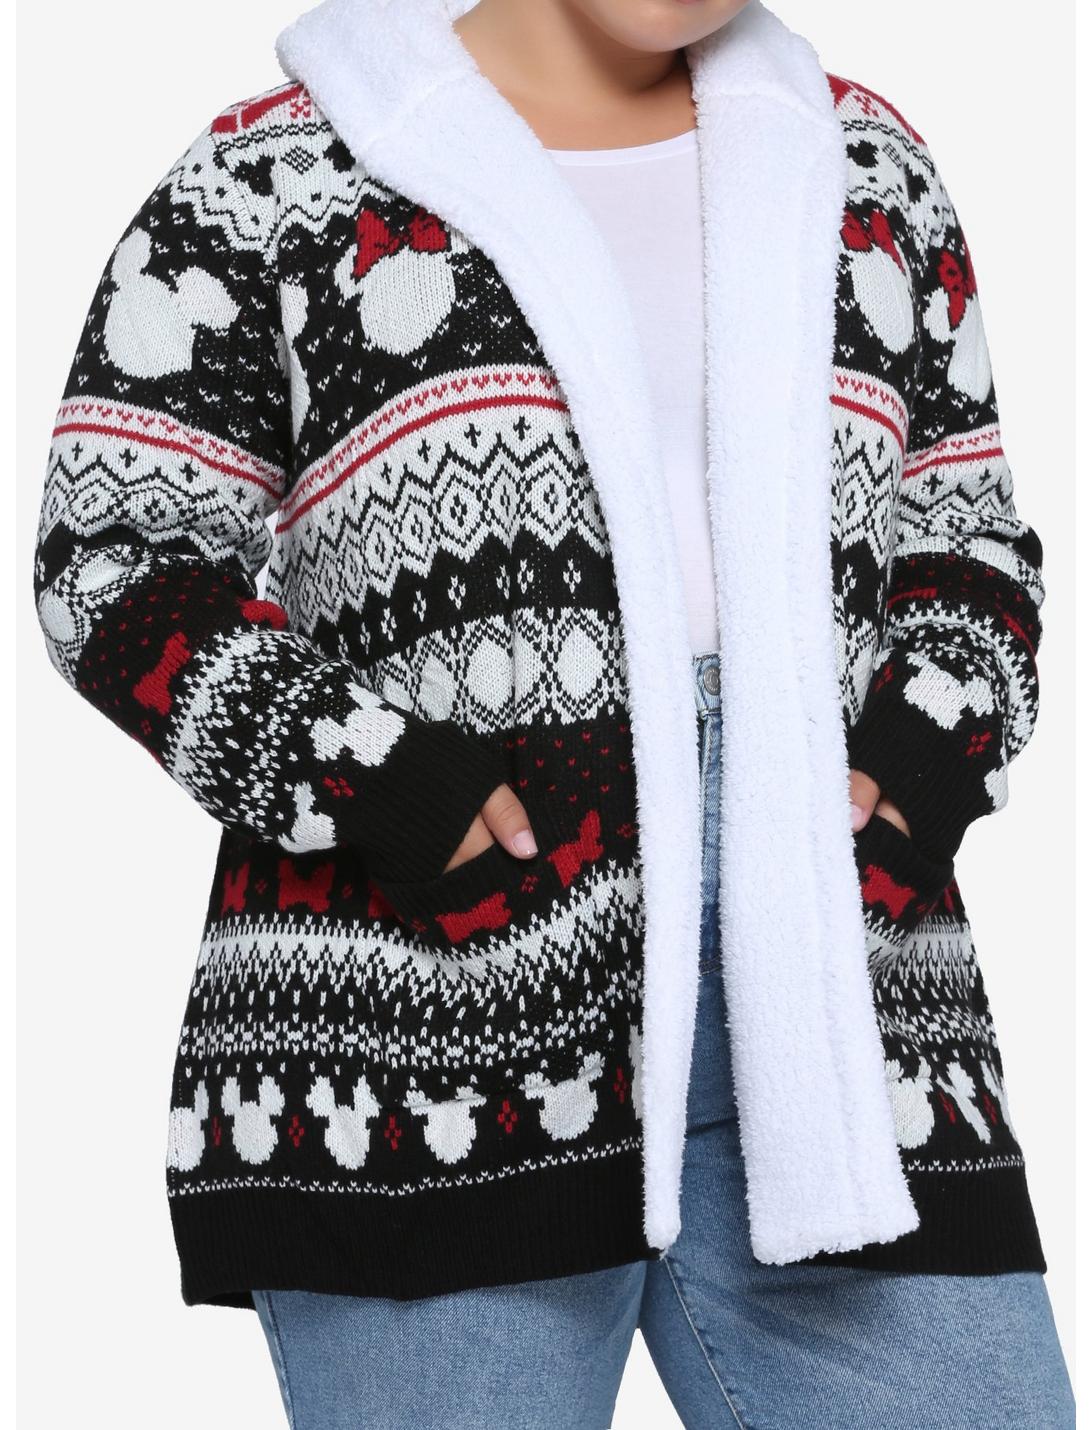 Disney Mickey Mouse & Minnie Mouse Fair Isle Sherpa Open Cardigan Plus Size, MULTI, hi-res